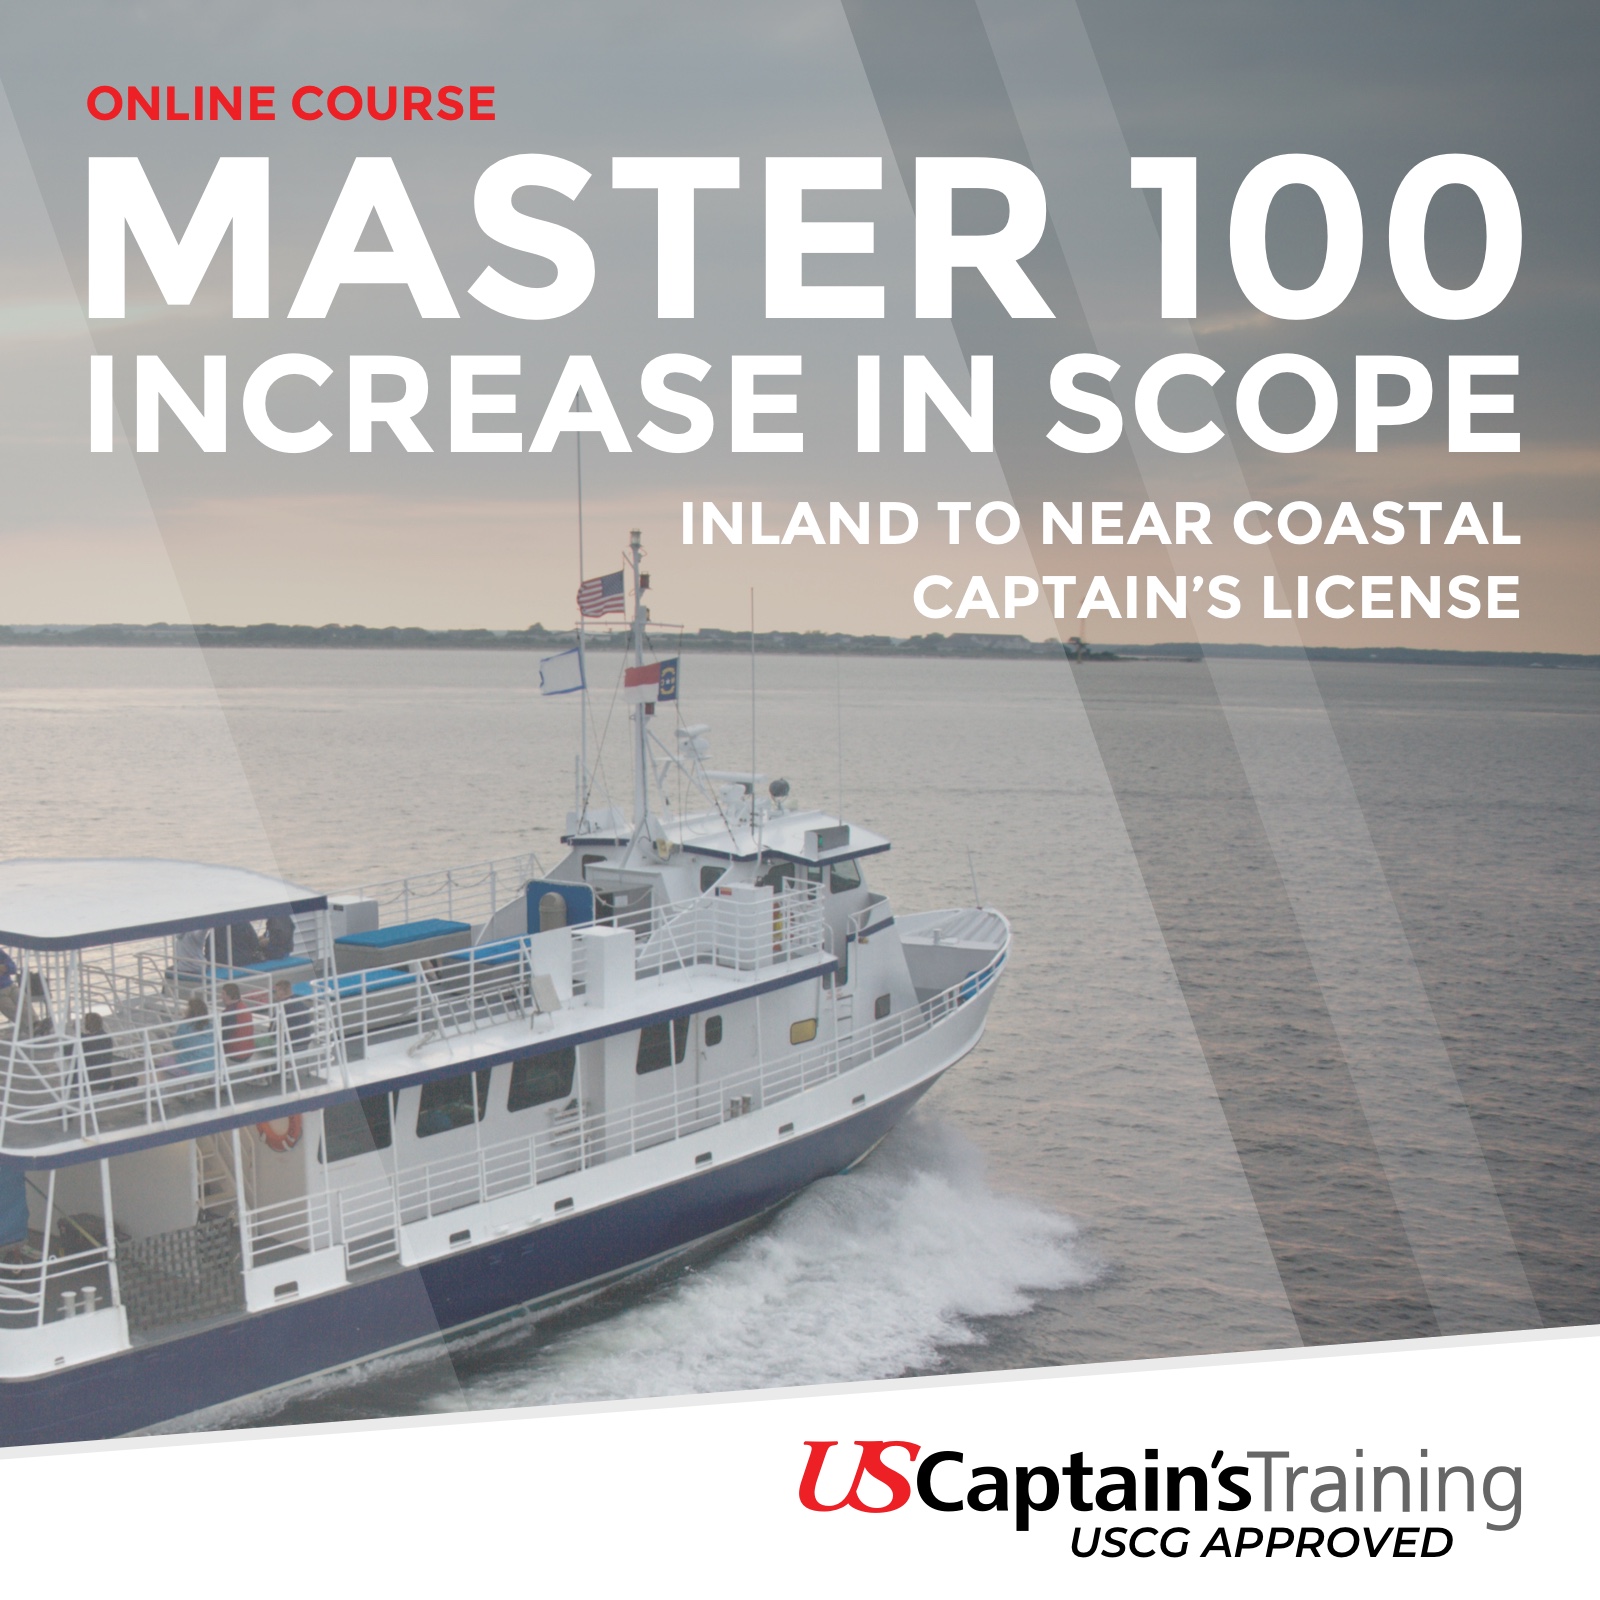 Captain's License Online Course & Exam from US Captain's Training - Master 100 Increase in Scope Inland to Near Coastal